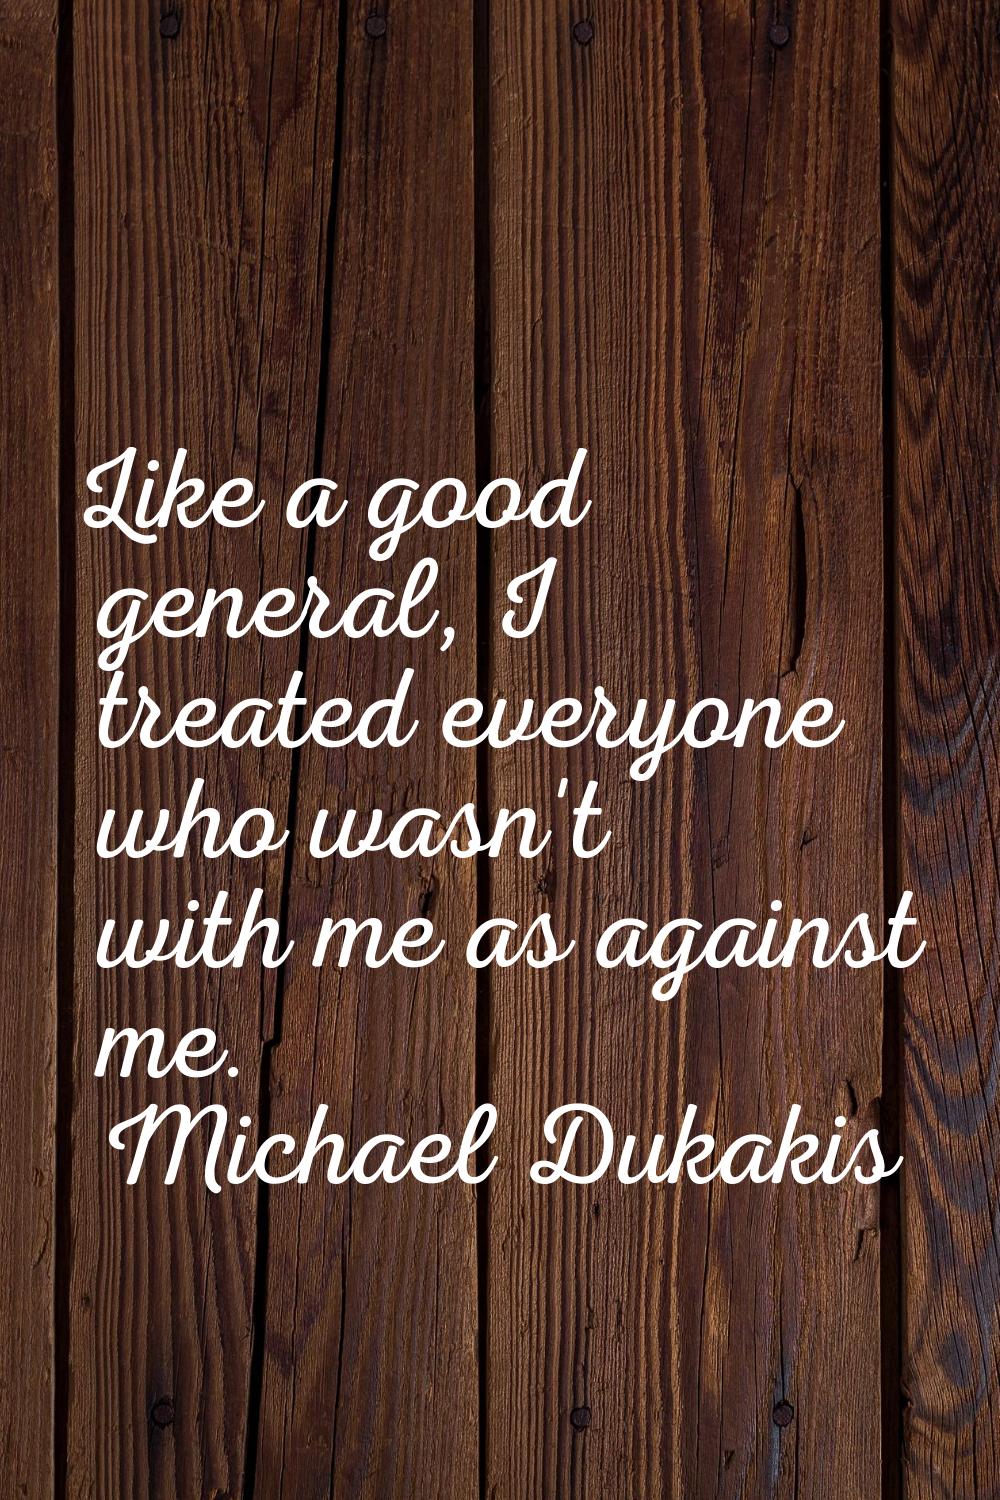 Like a good general, I treated everyone who wasn't with me as against me.